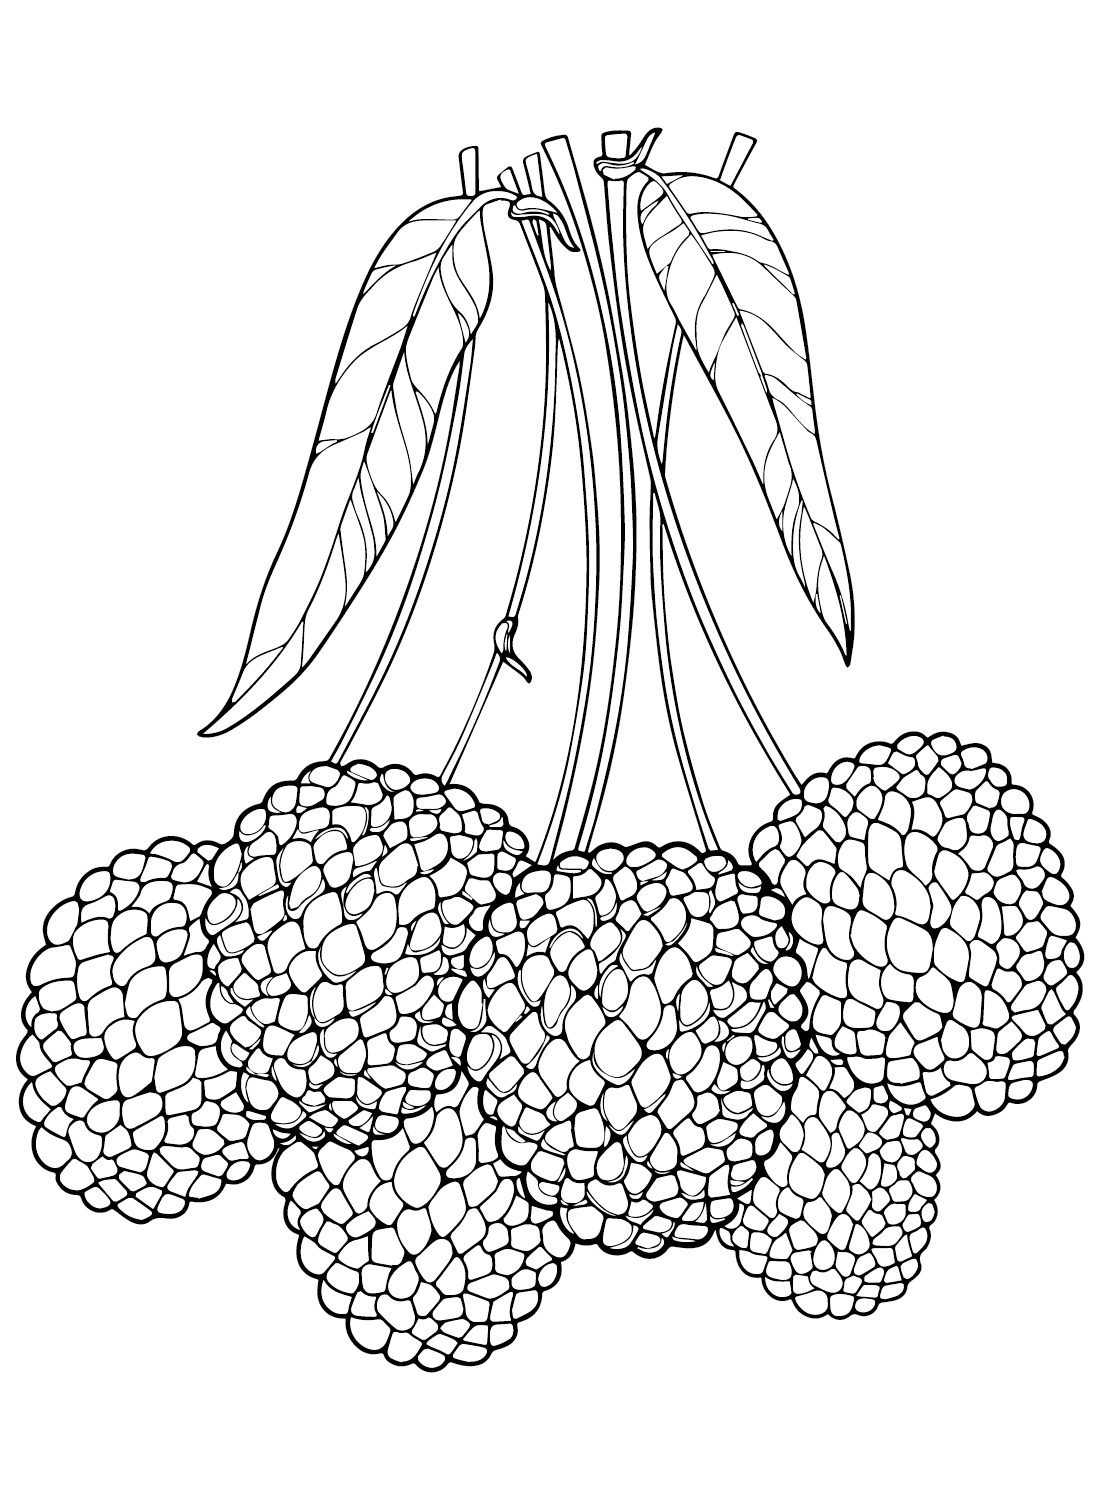 Lychee Printable Coloring Page